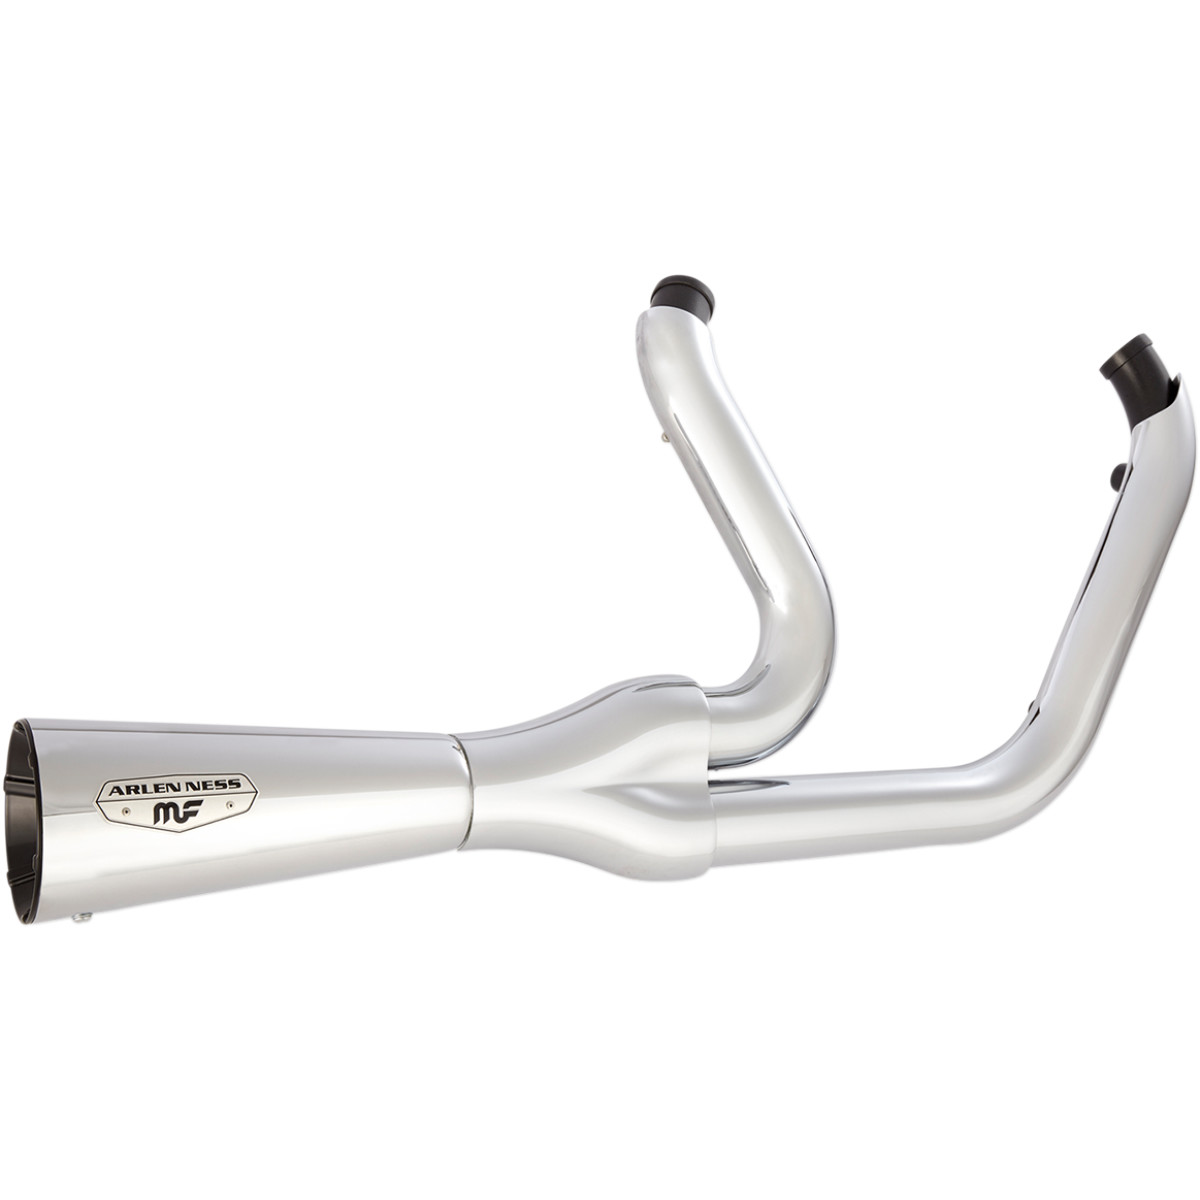 HARLEY DAVIDSON FXST, FLST COMPLETE EXHAUST SYSTEM F-BOMB 2-INTO-1 ALUMINUM CHROME